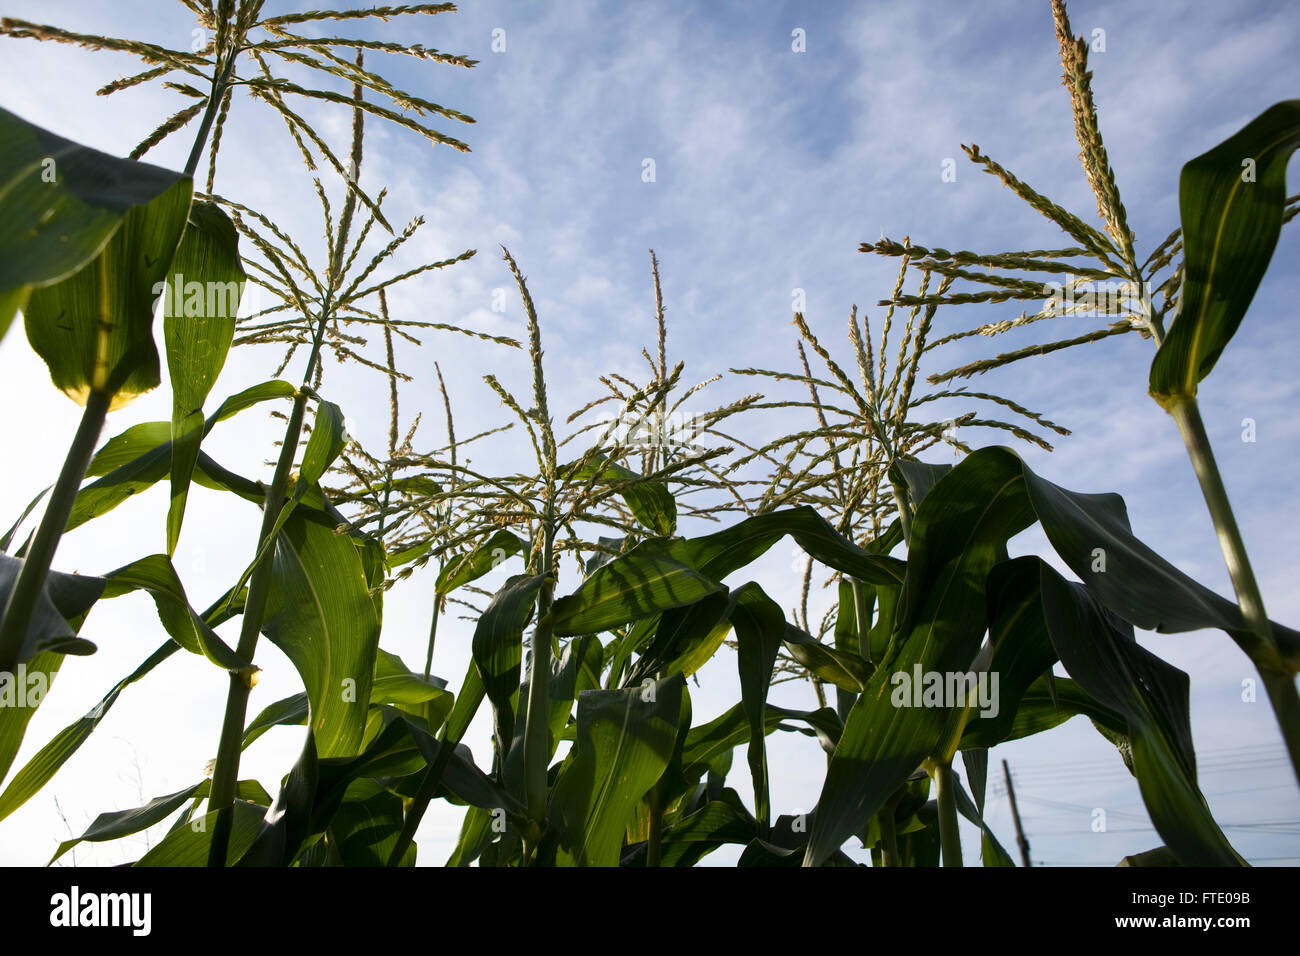 Young shoots of the sweetcorn plant thrust skywards in the early morning sunlight. Stock Photo